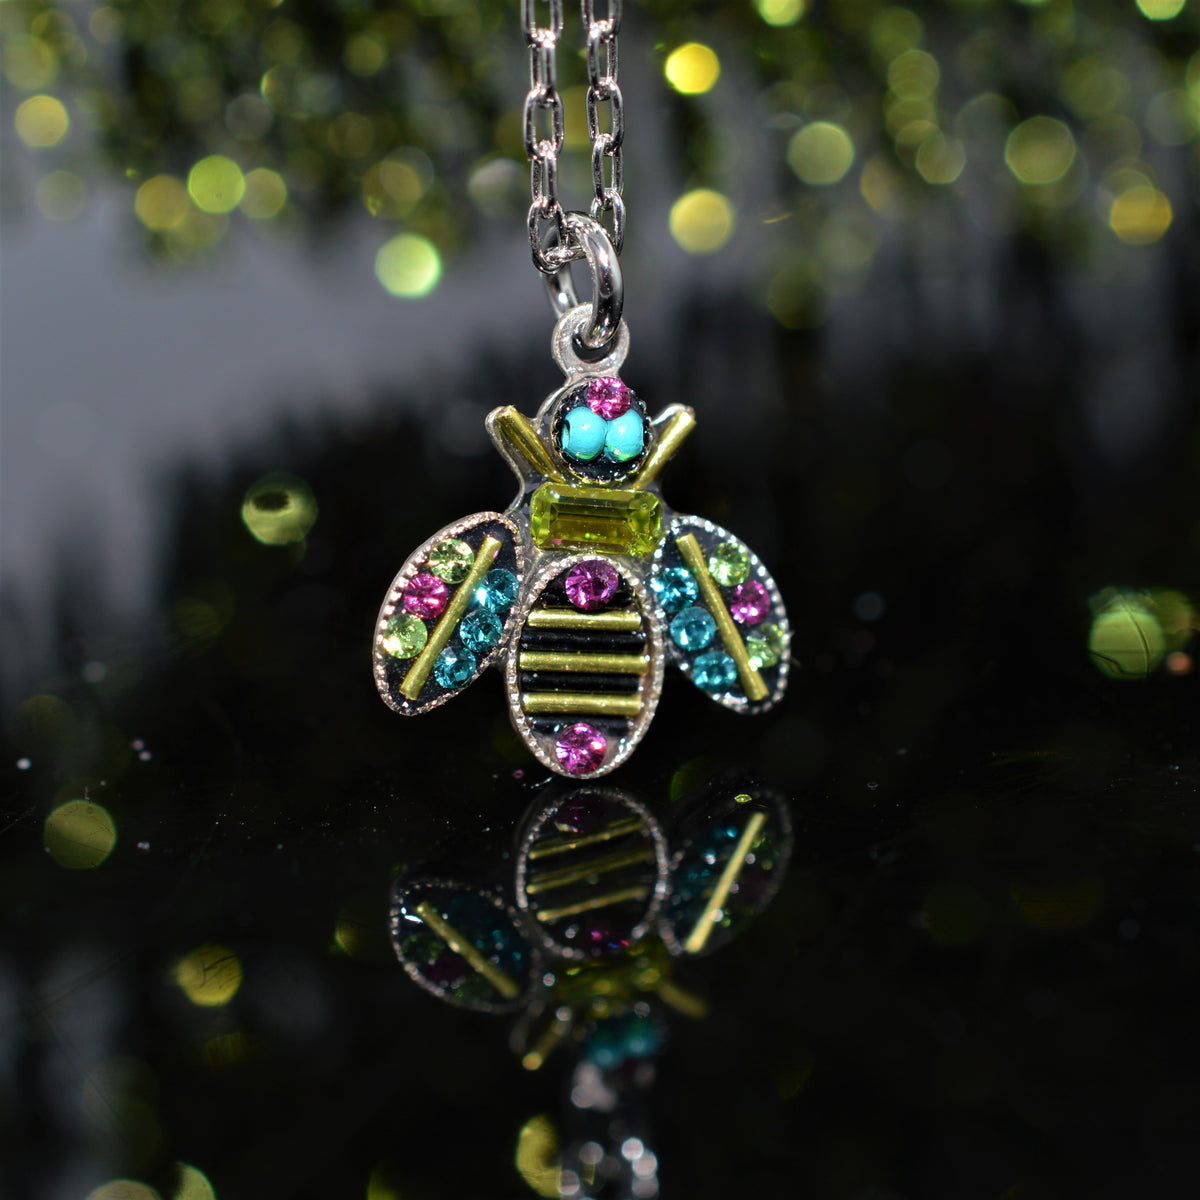 Antique Silver Plated Queen Bee Pendant With Citrus Green Colored Crystals by Firefly